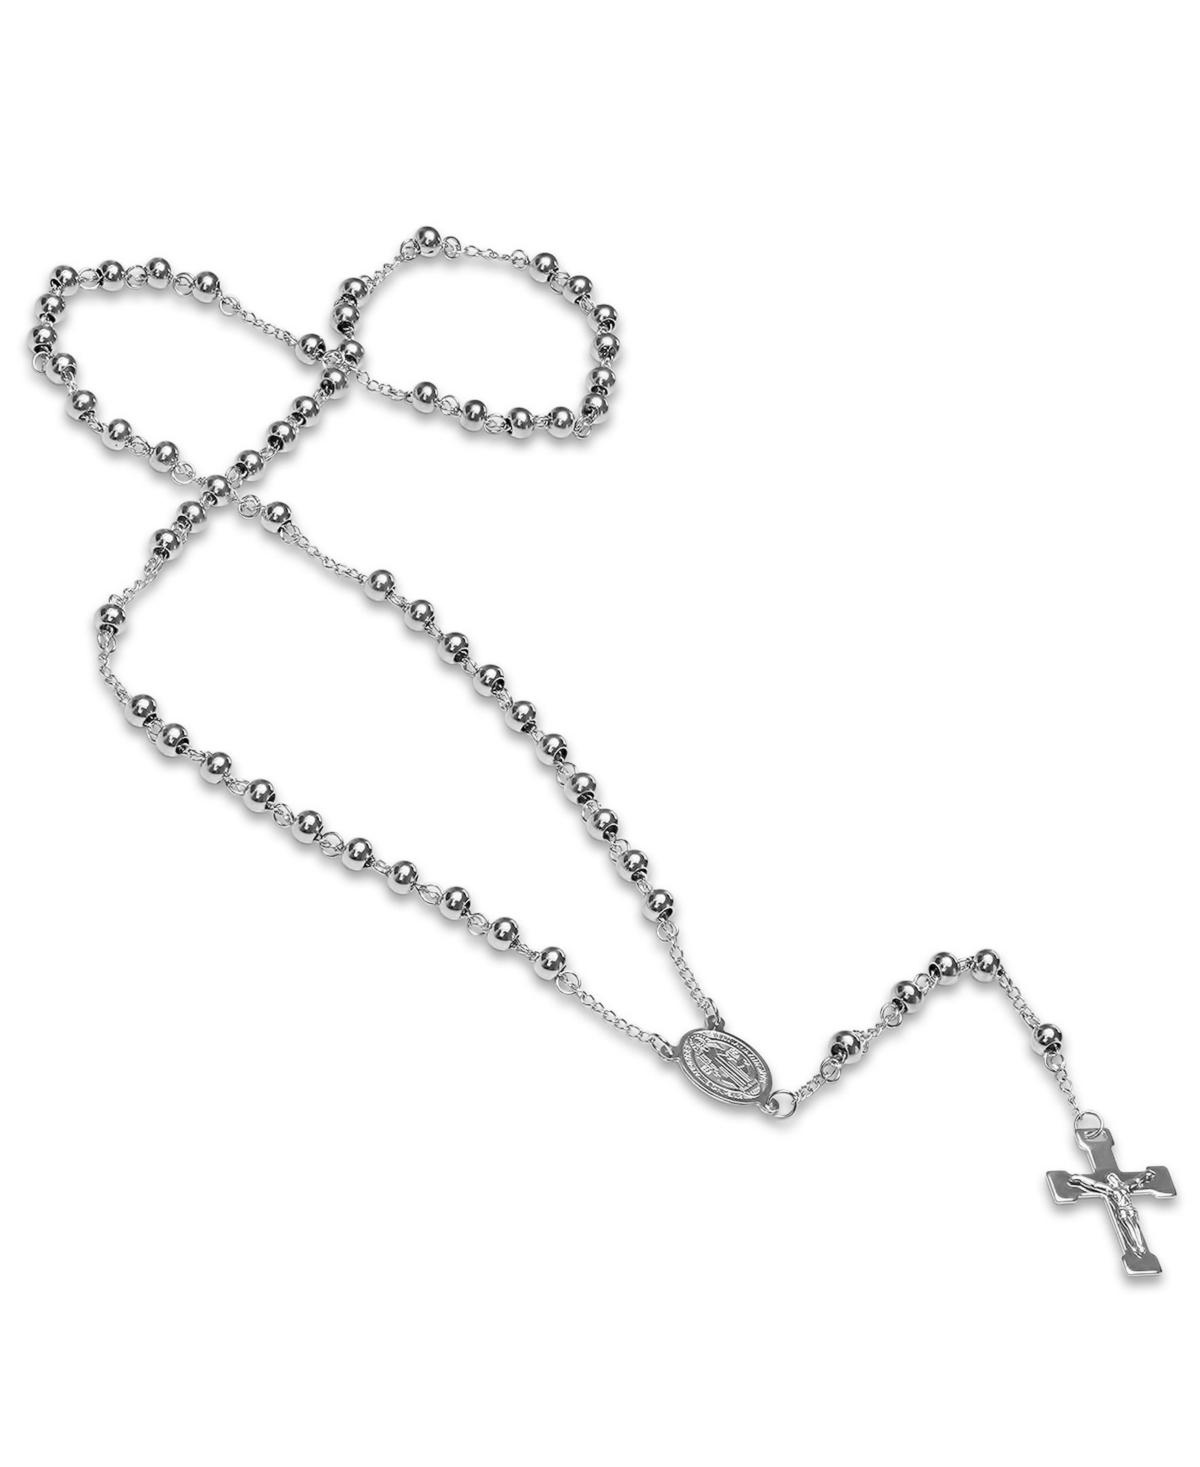 Stainless Steel Religious Classic Beaded Rosary with Necklaces - Silver